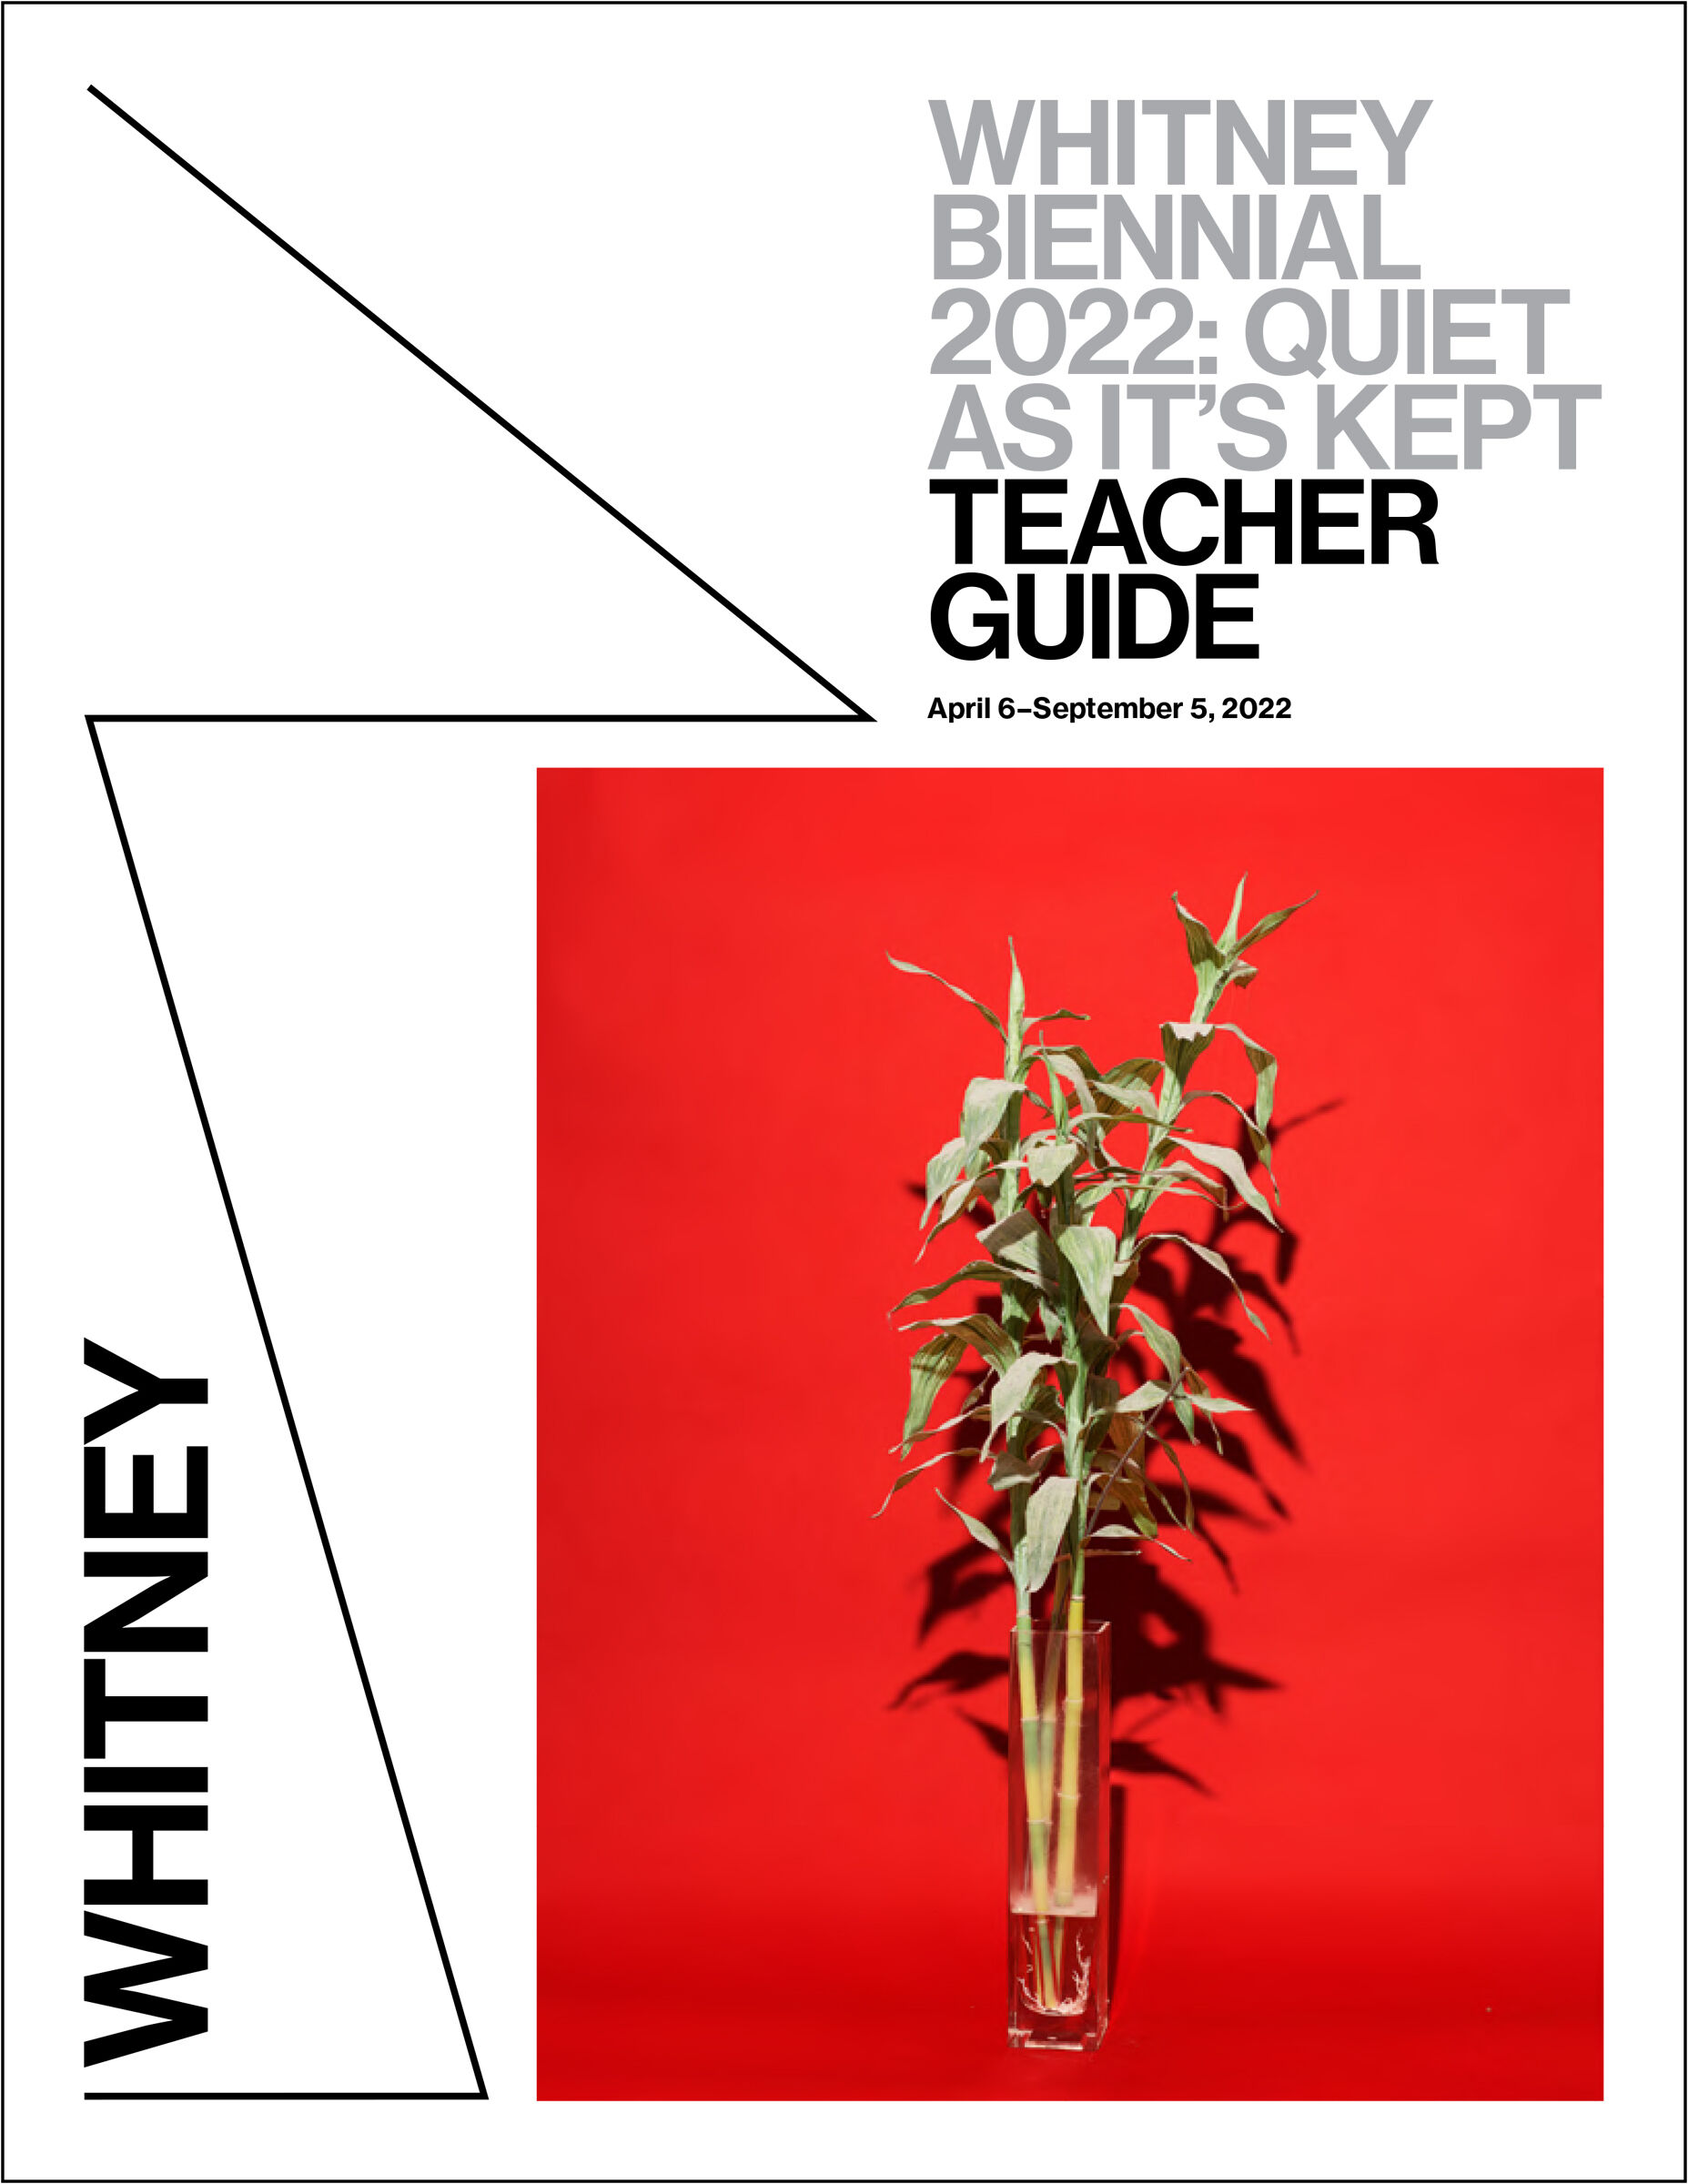 Cover image of the Teacher Guide for Whitney Biennial 2022: Quiet as It's Kept, with an image of a plant in a vase against a red backdrop.